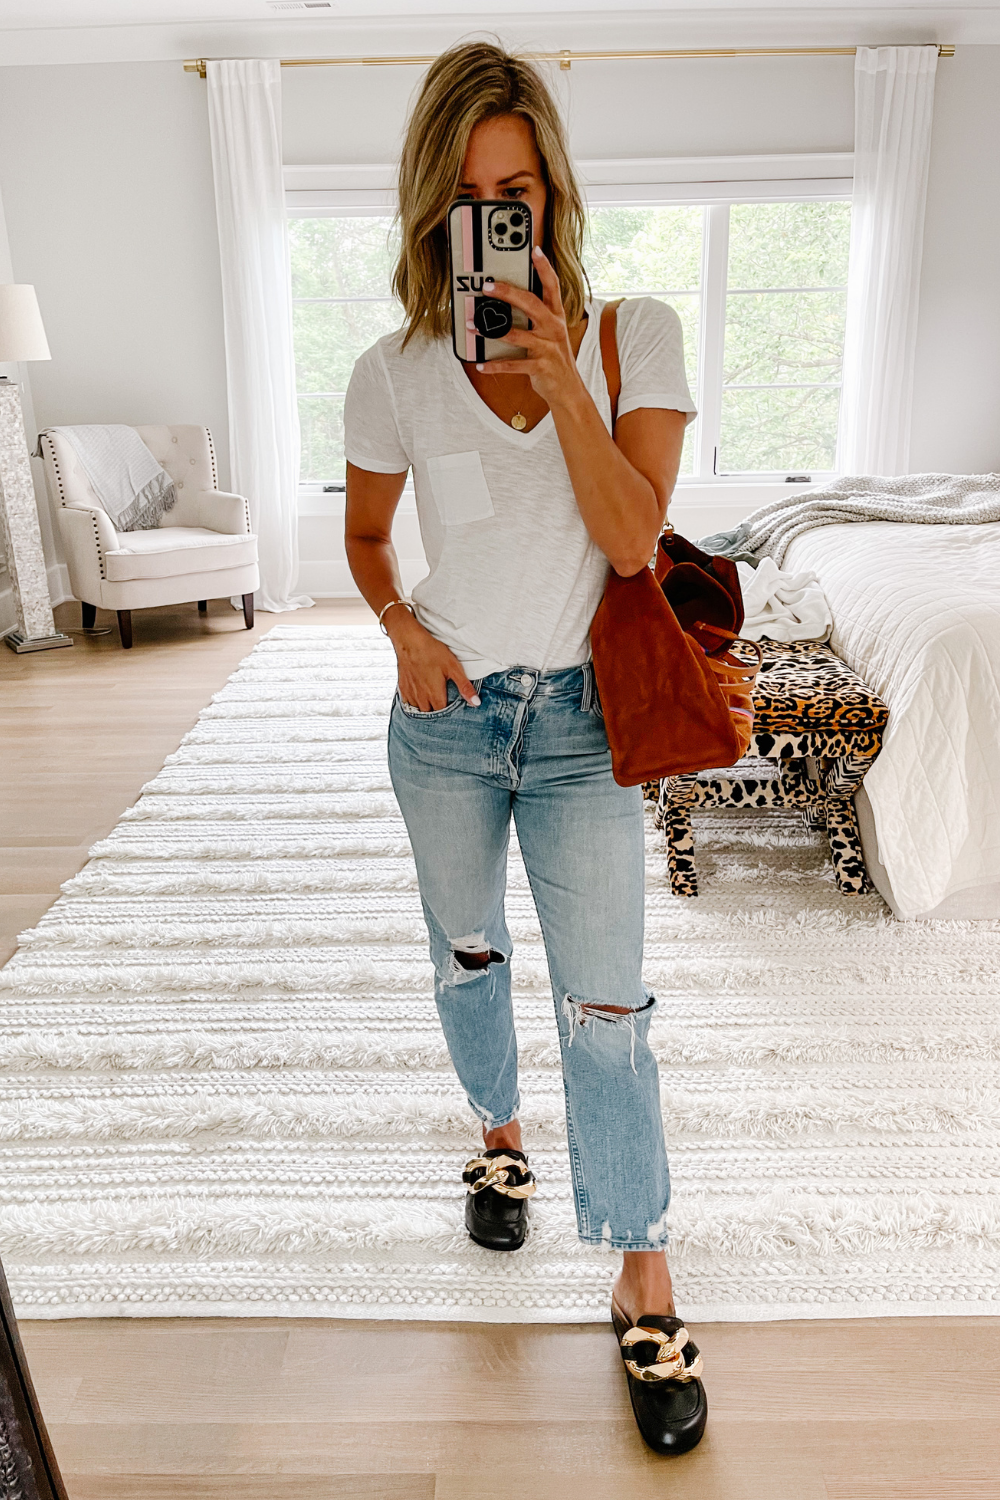 August #ootd round up: white tee and jeans